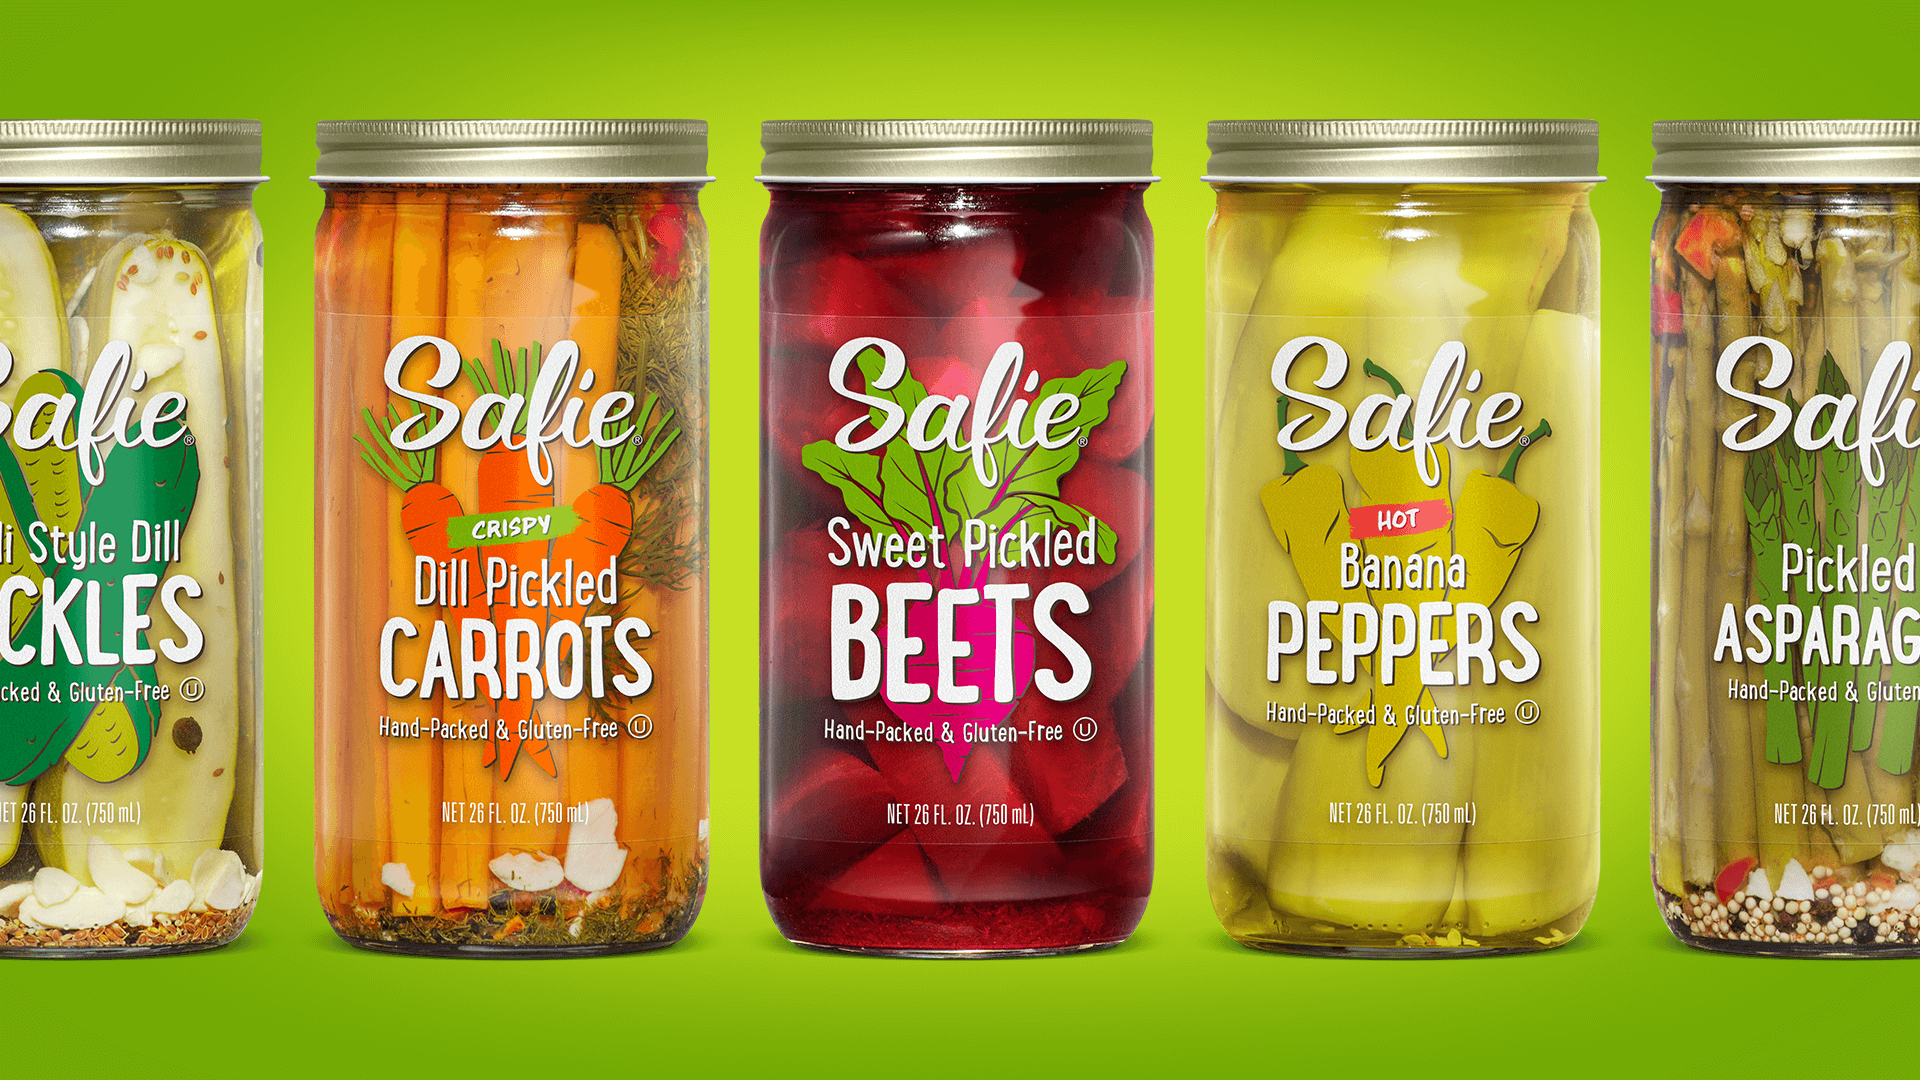 we created a brand, packaging, messaging and design that is lively and appealing to chefs, caterers and the everyday shopper.